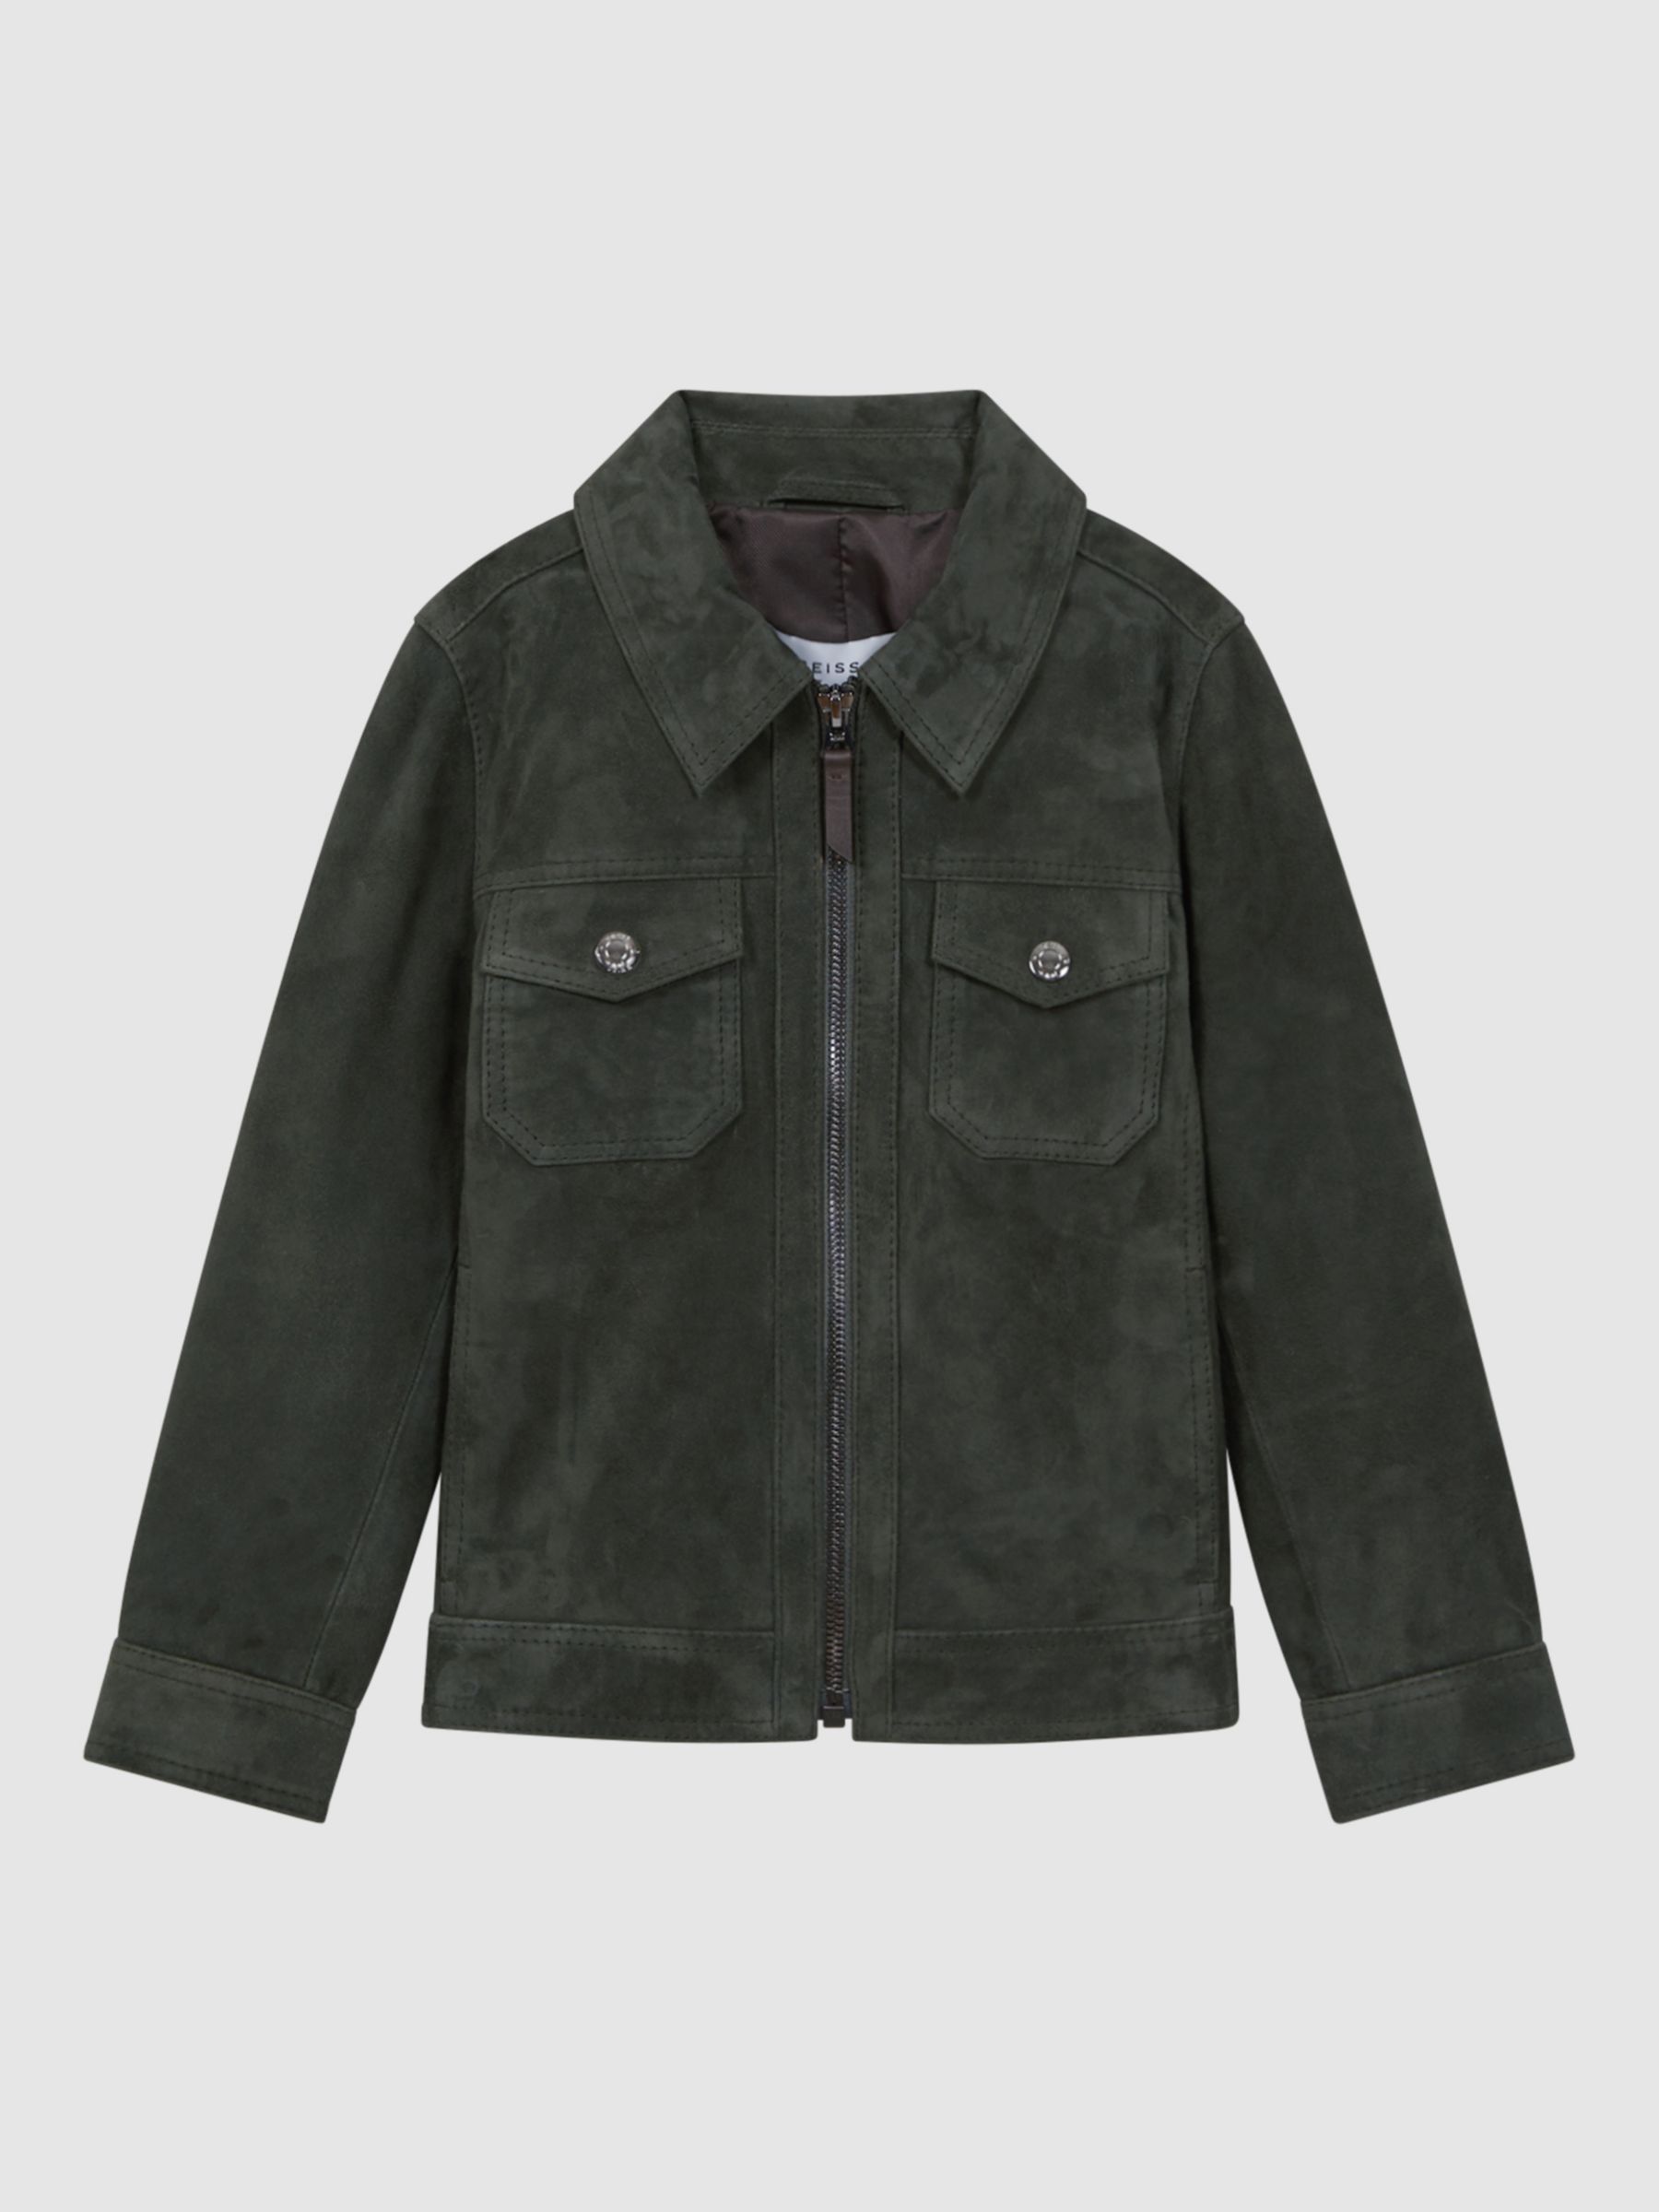 Reiss Kids' Pike Suede Jacket, Forest Green, 10-11 years